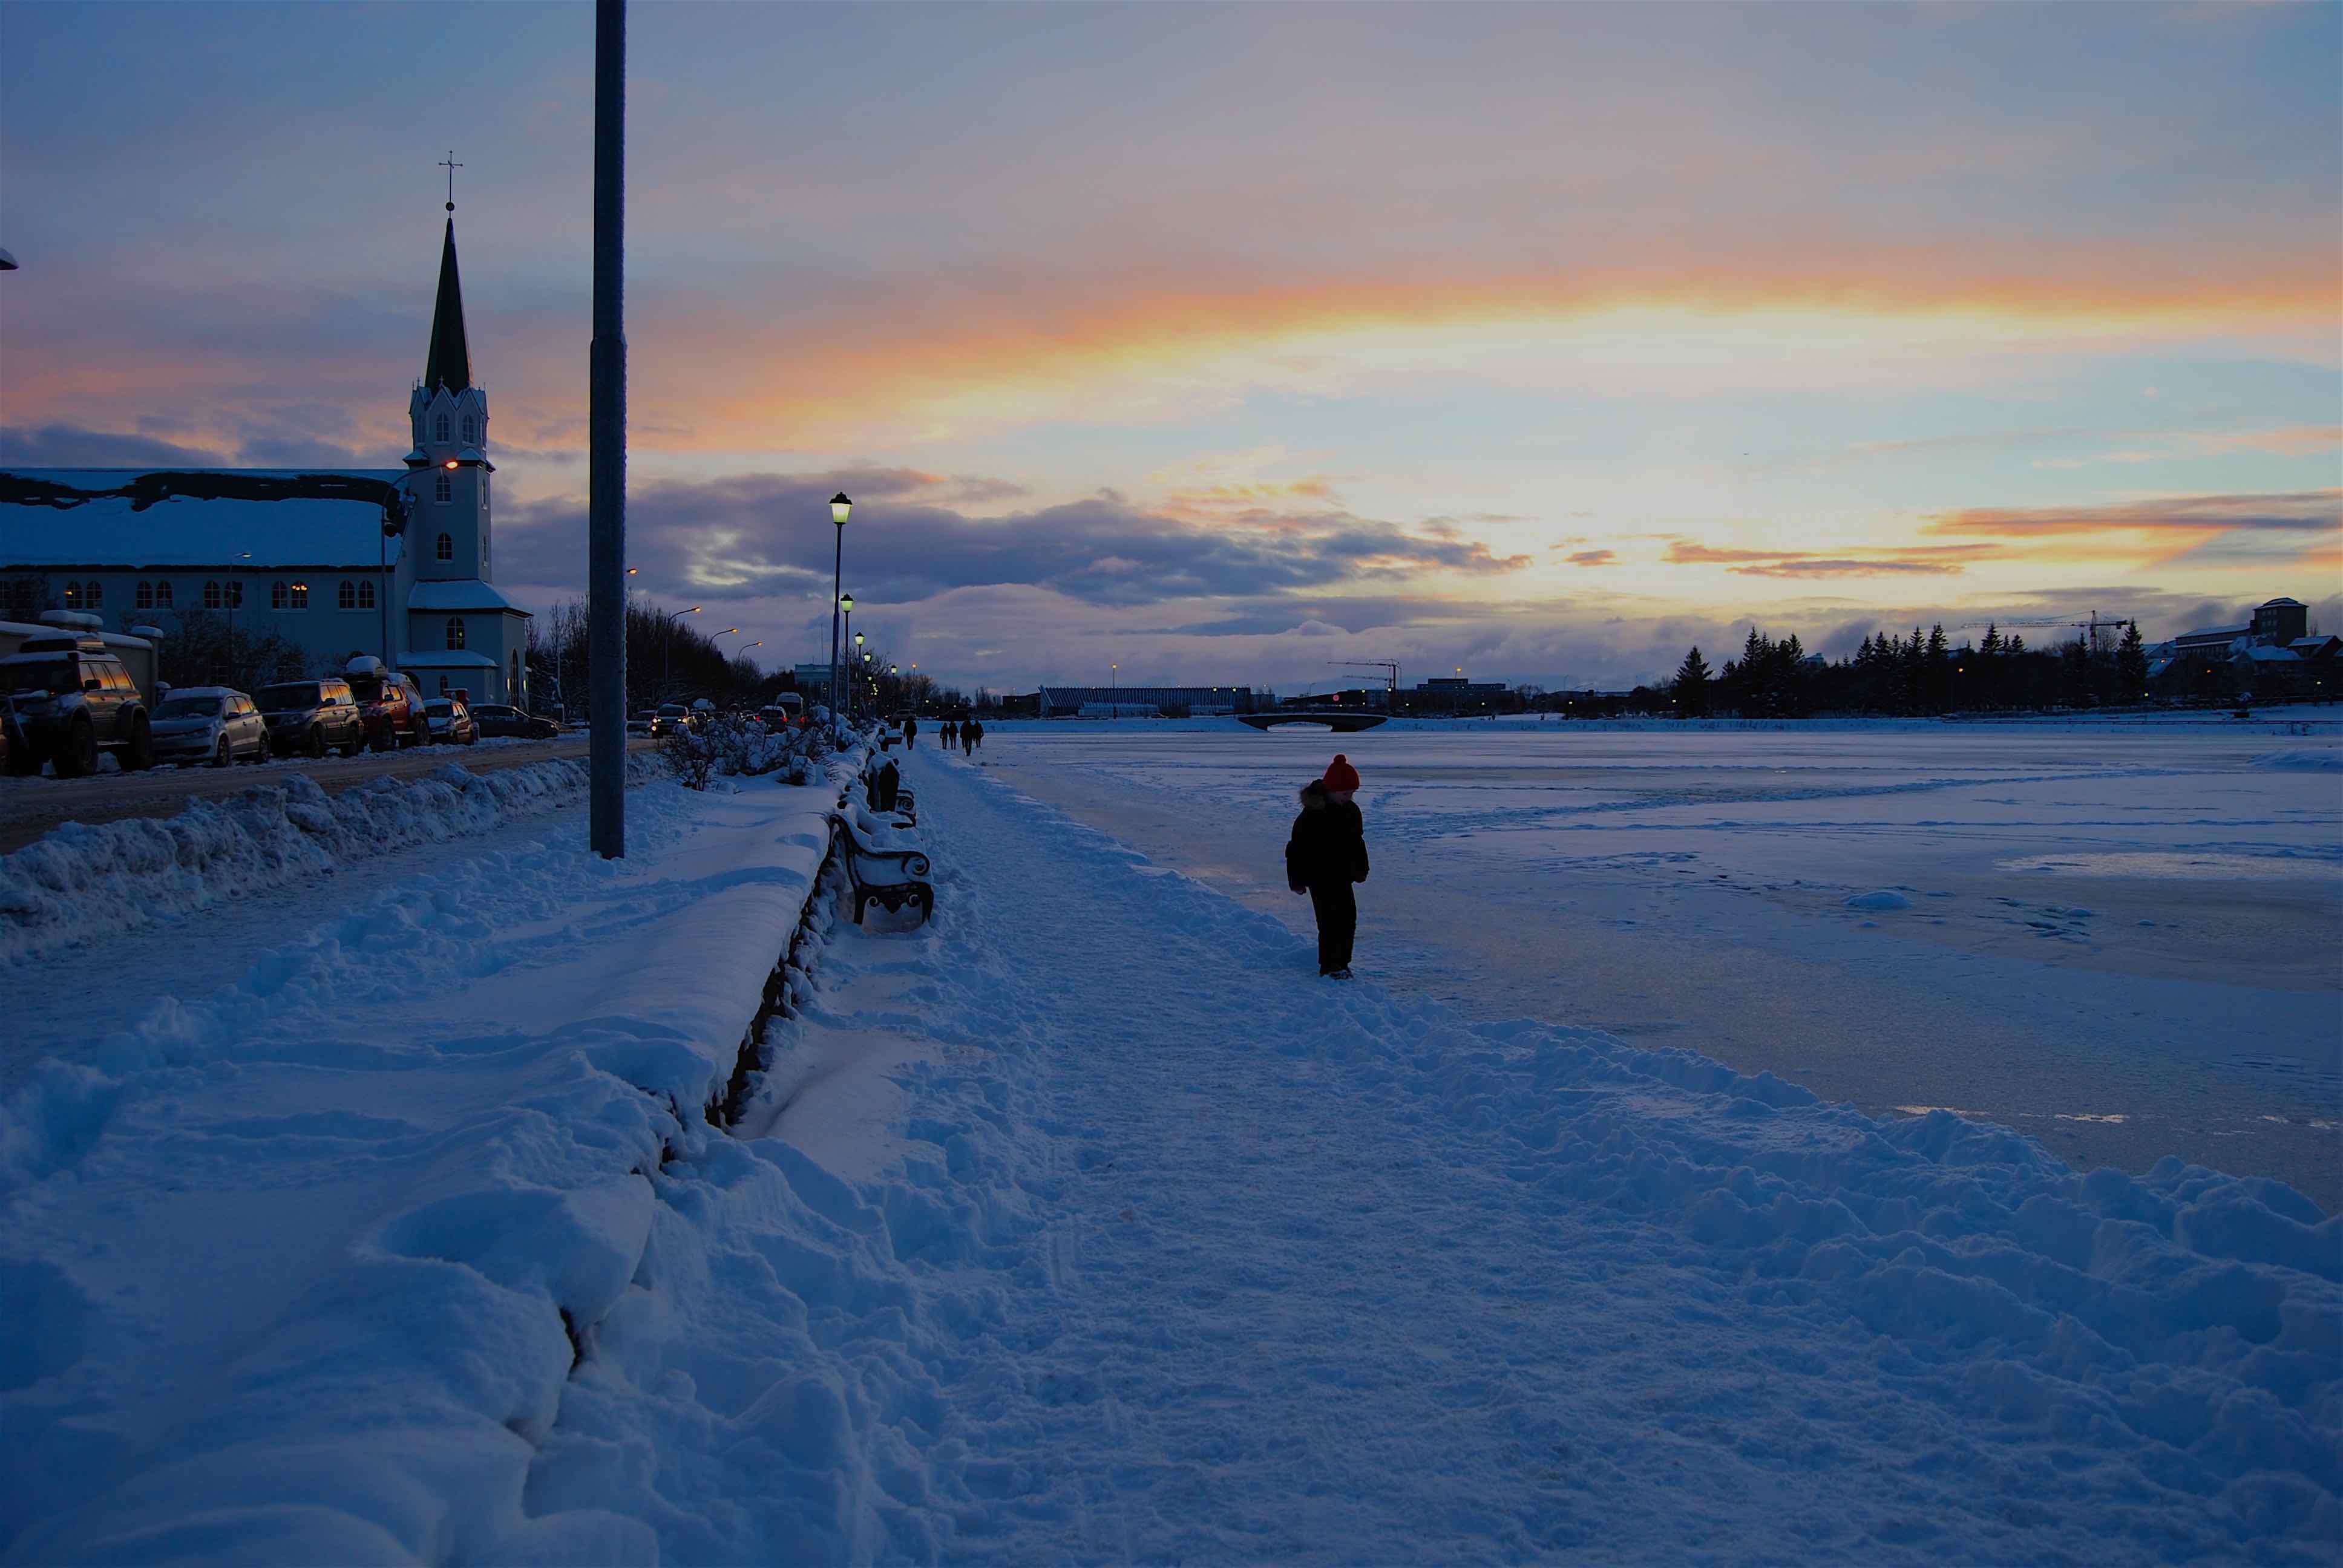 Visit Reykjavík in the winter time and immerse yourself in a wonderland of snow and ice.